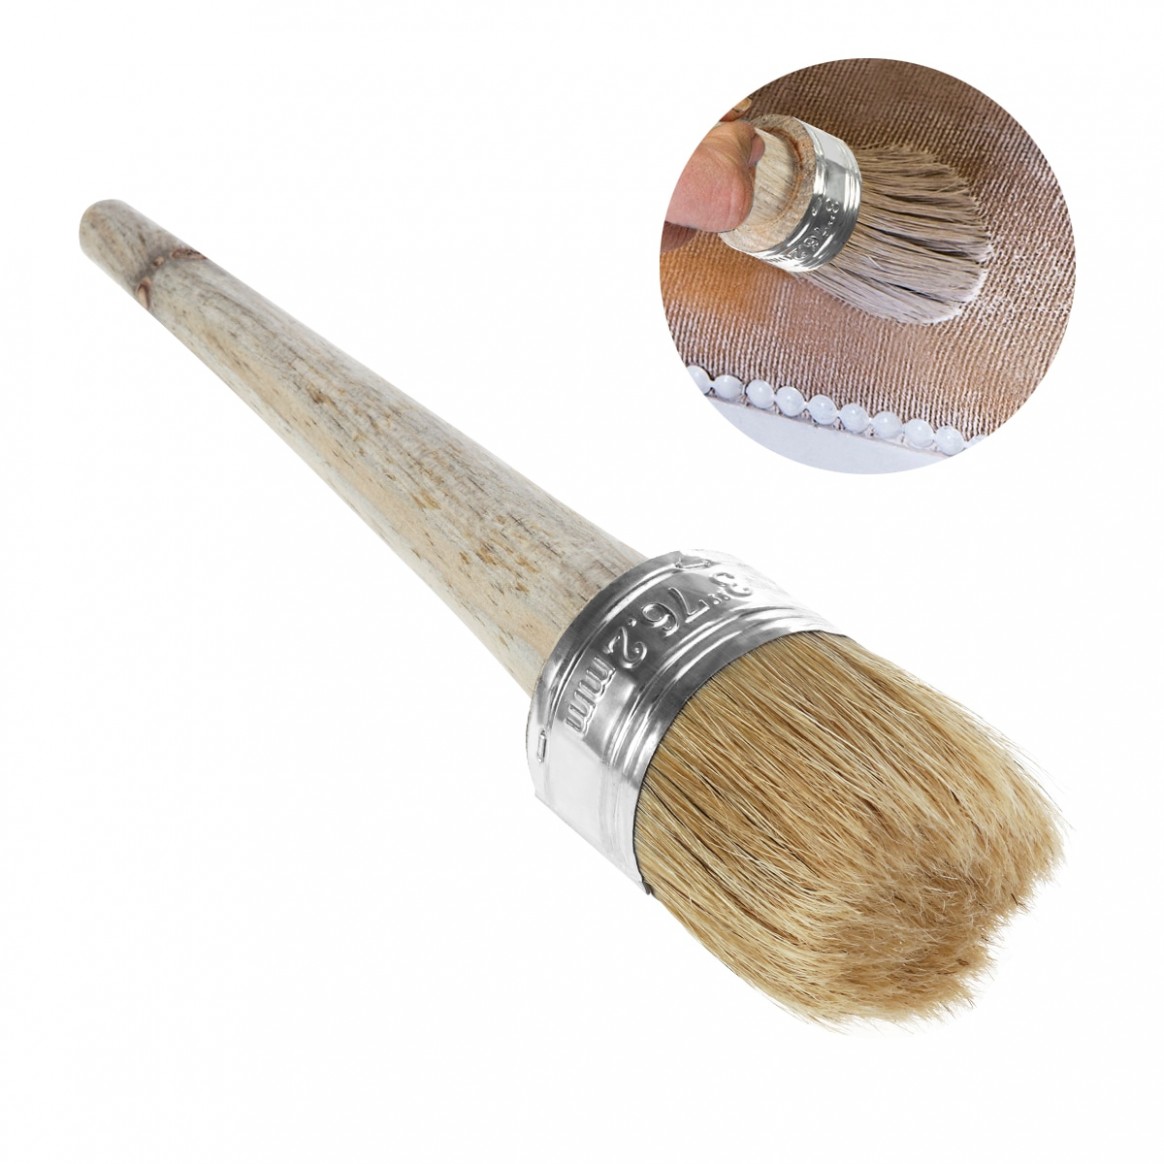 Us $6.6 6% Off|chalk Paint Wax Brush For Painting Or Waxing Furniture Stencils Folkart Home Decor Wood Large Brushes With Natural Bristles In Paint ..